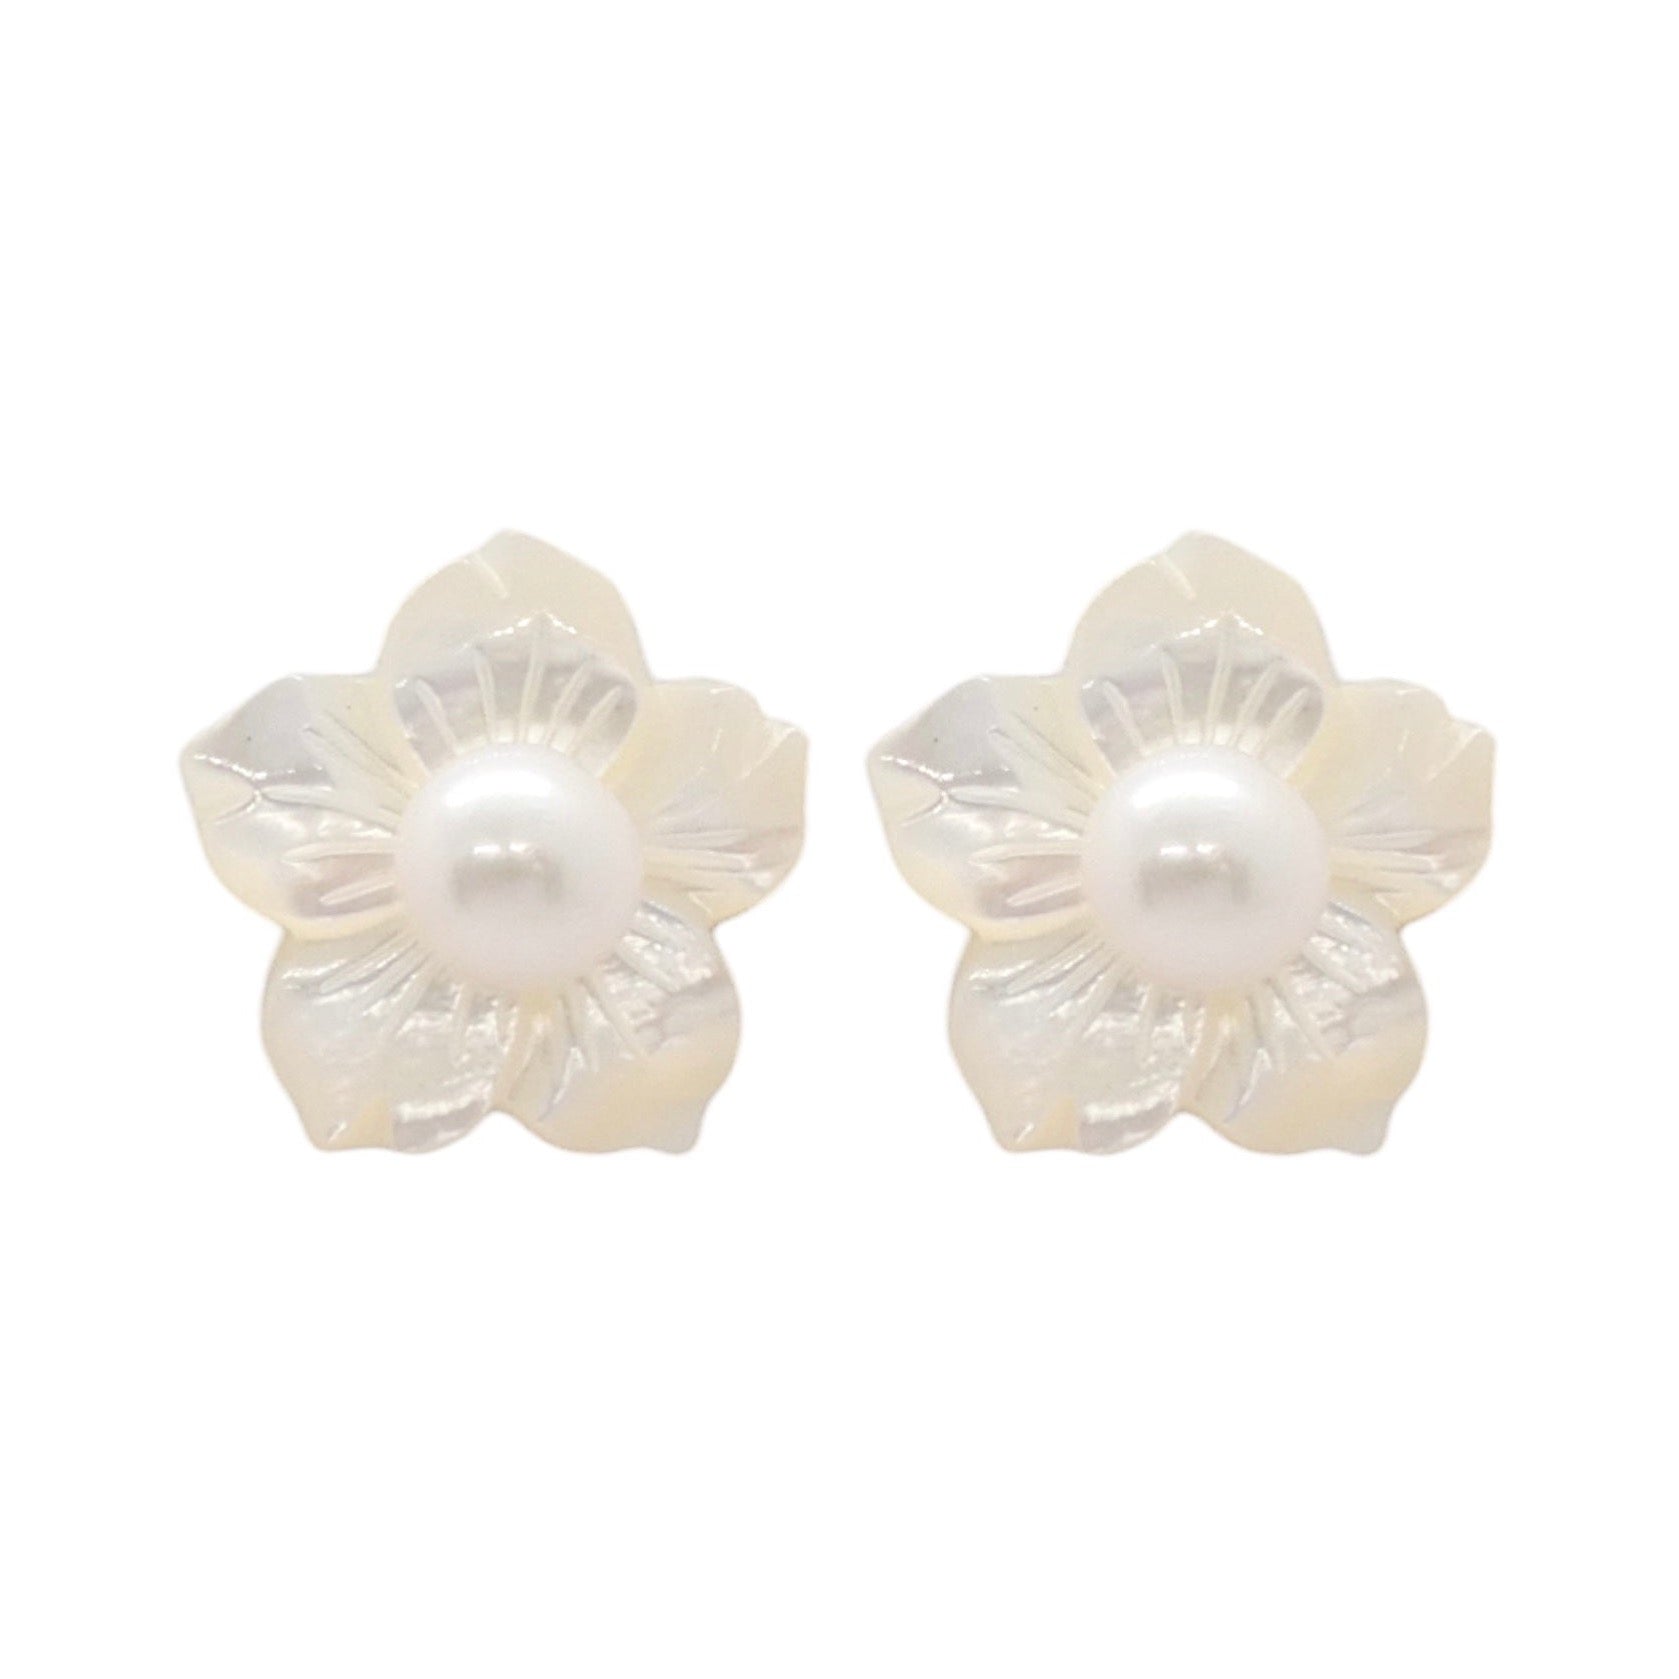 Dainty Gold Flower Stud Earrings with White Seed Pearl – ARTEMER